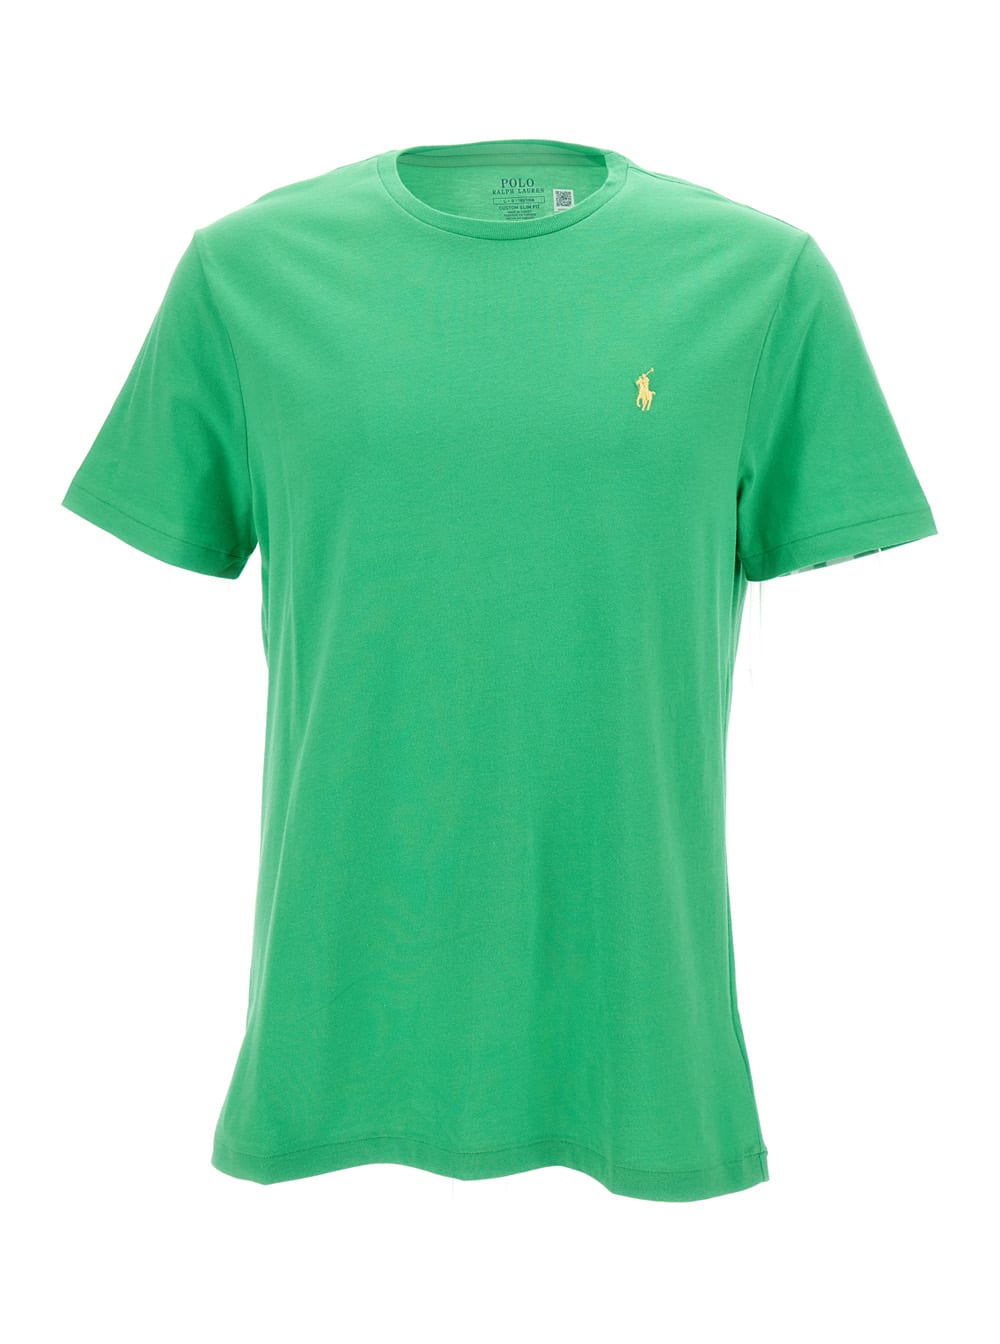 POLO RALPH LAUREN GREEN CREWNECK T-SHIRT WITH PONY EMBROIDERY IN COTTON MAN